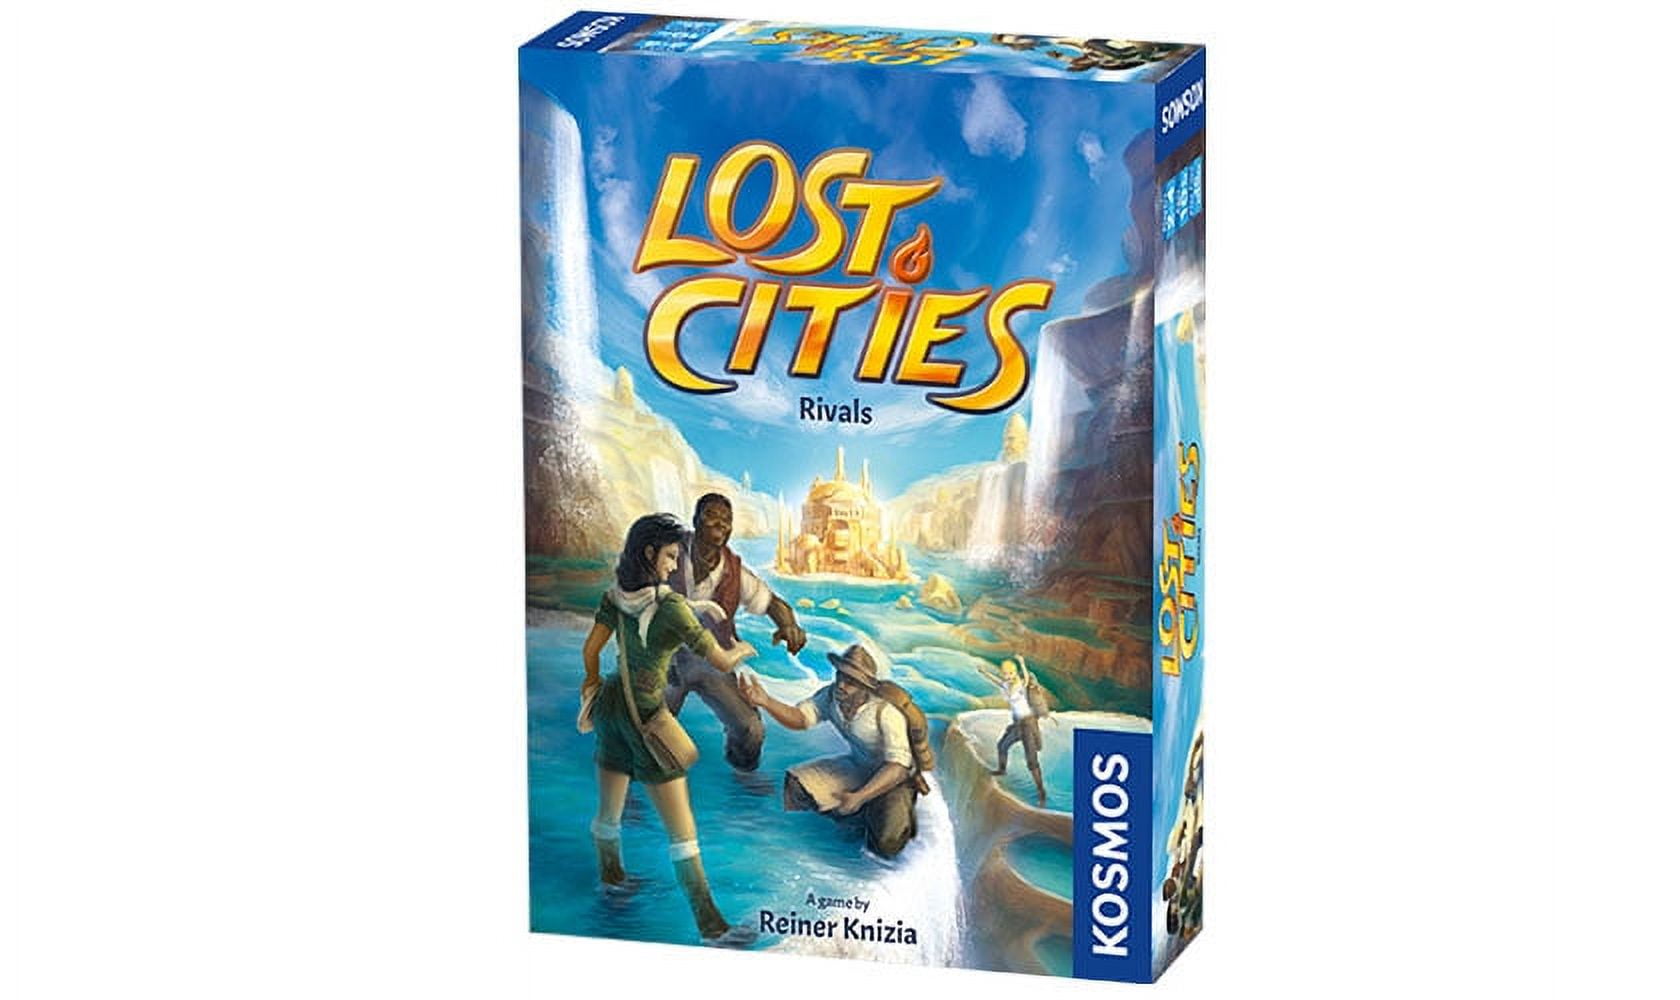 Thk690335 Lost Cities Rivals Board Game